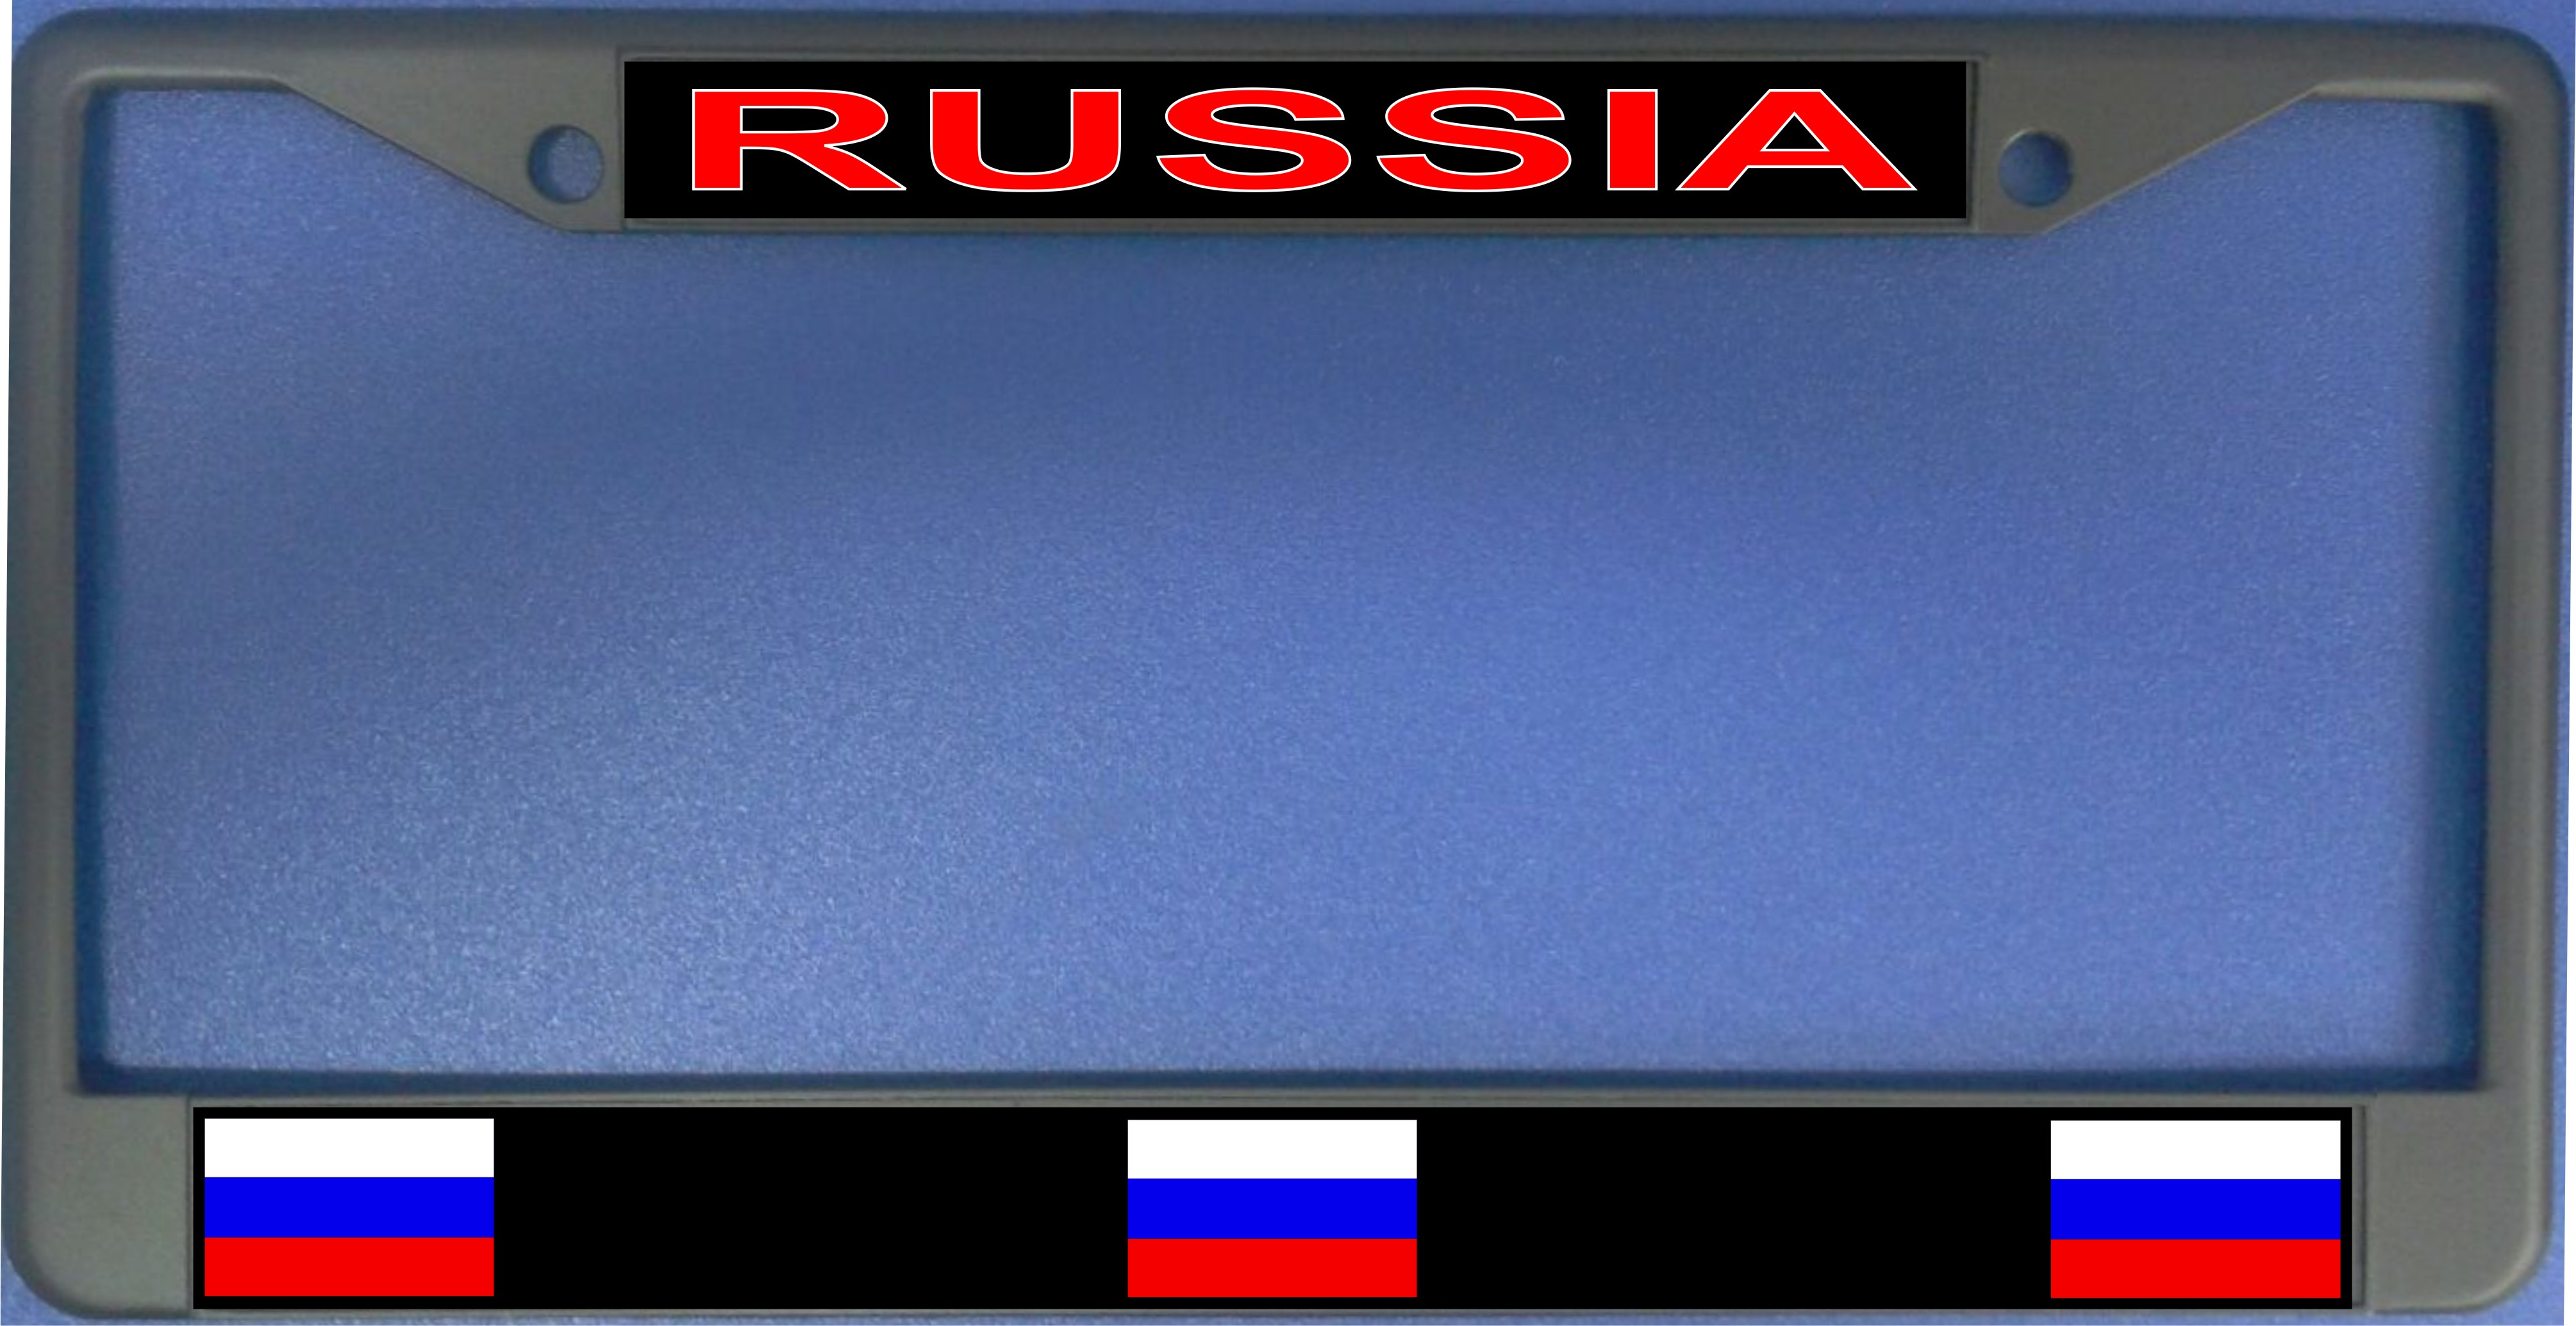 Russia Flag Photo License Plate Frame Free SCREW Caps Included